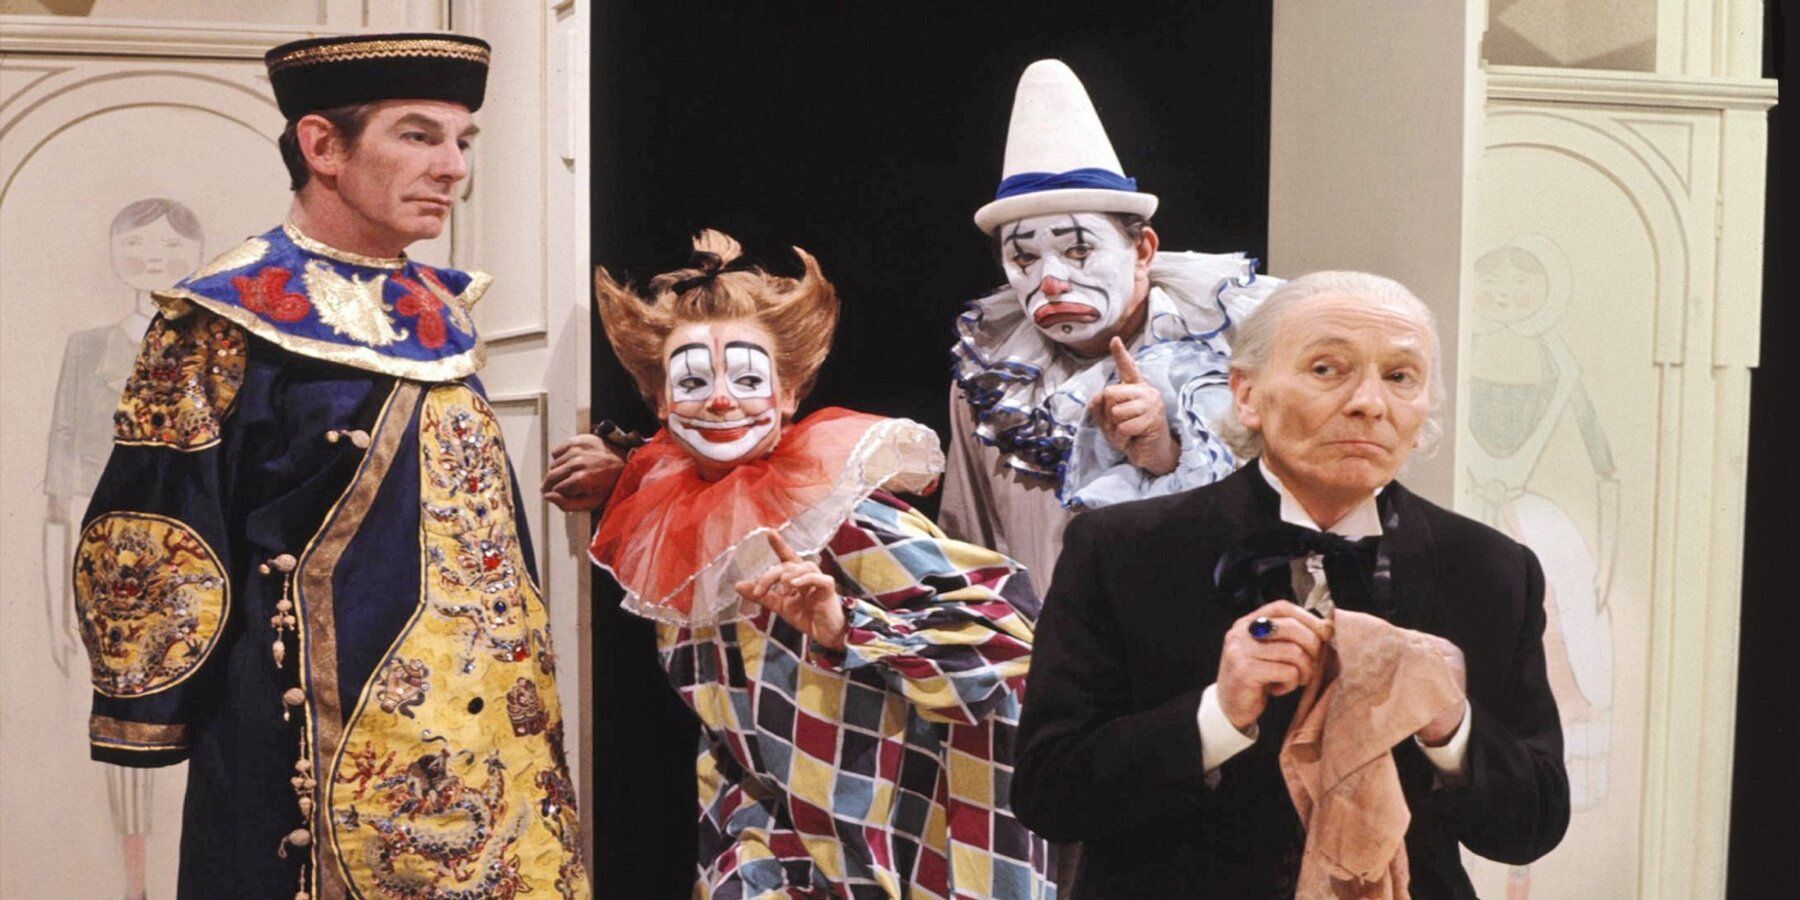 Doctor Who The Celestial toymaker with clowns and first doctor 